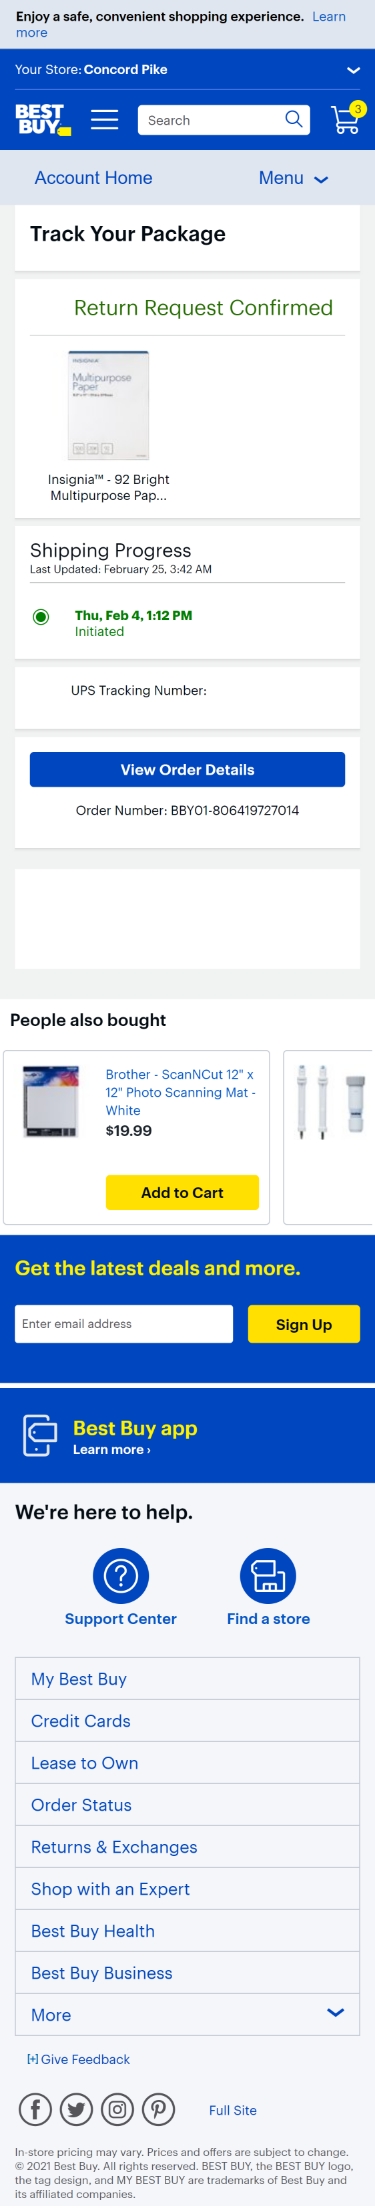 bestbuy return tracking page mobile